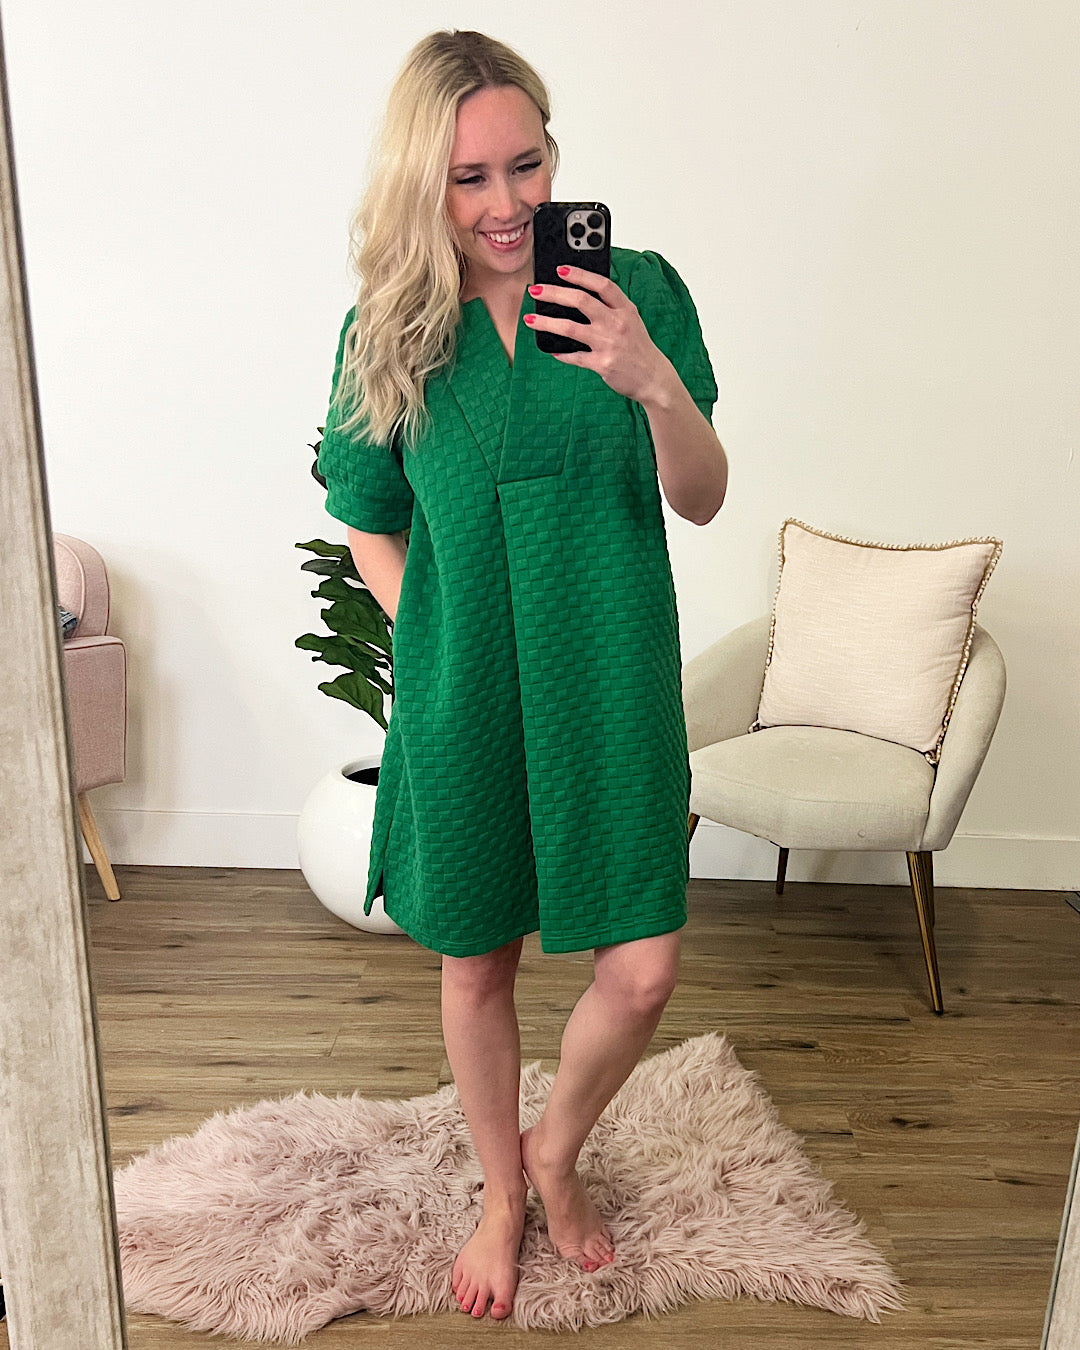 Kelly Green Checkered Dress  Lovely Melody   